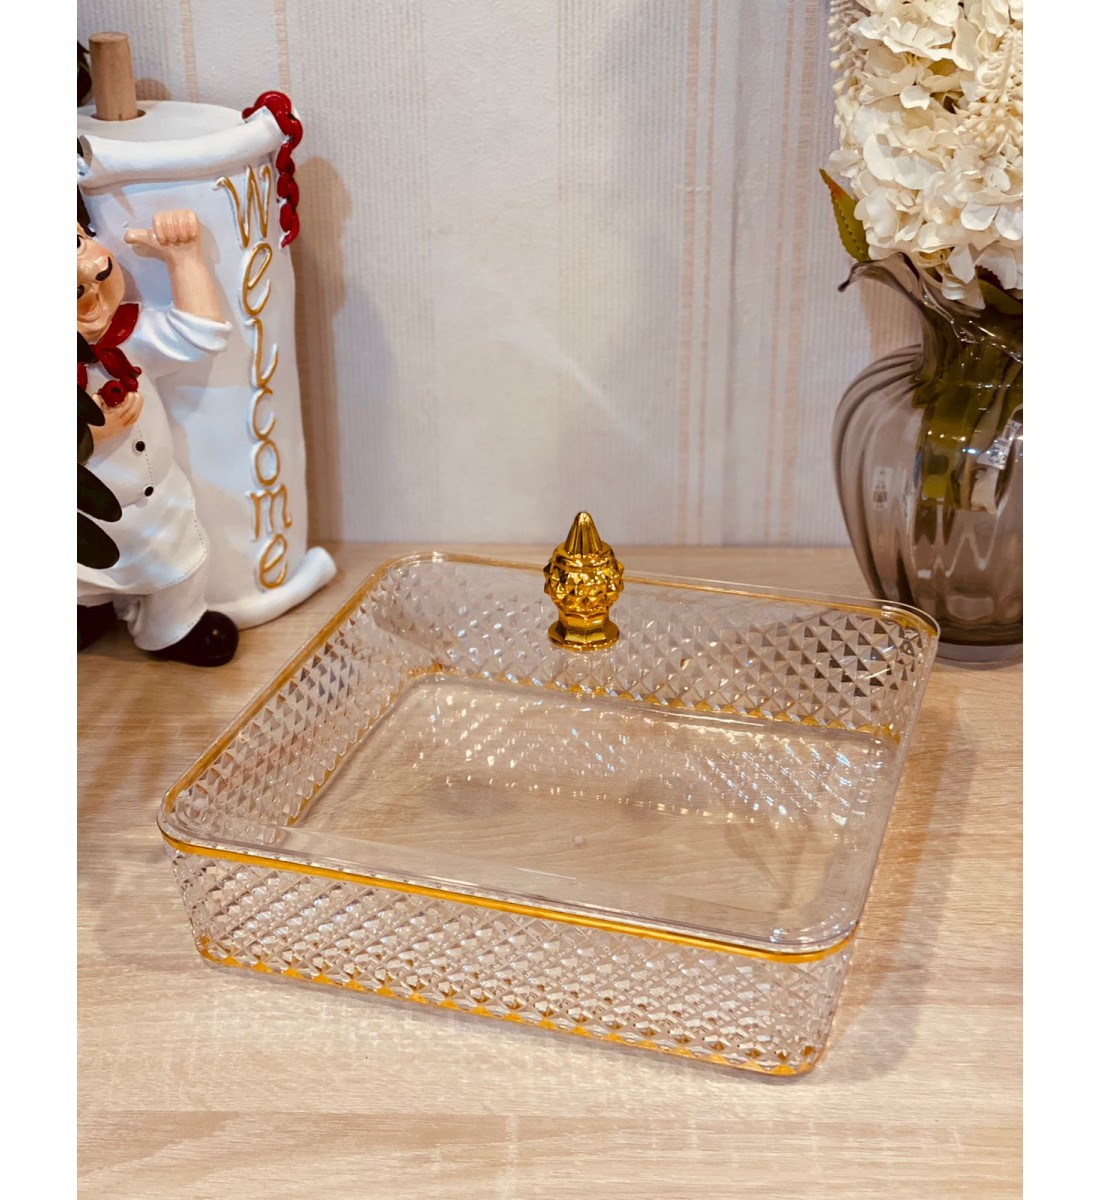 Square acrylic cake tray with lid